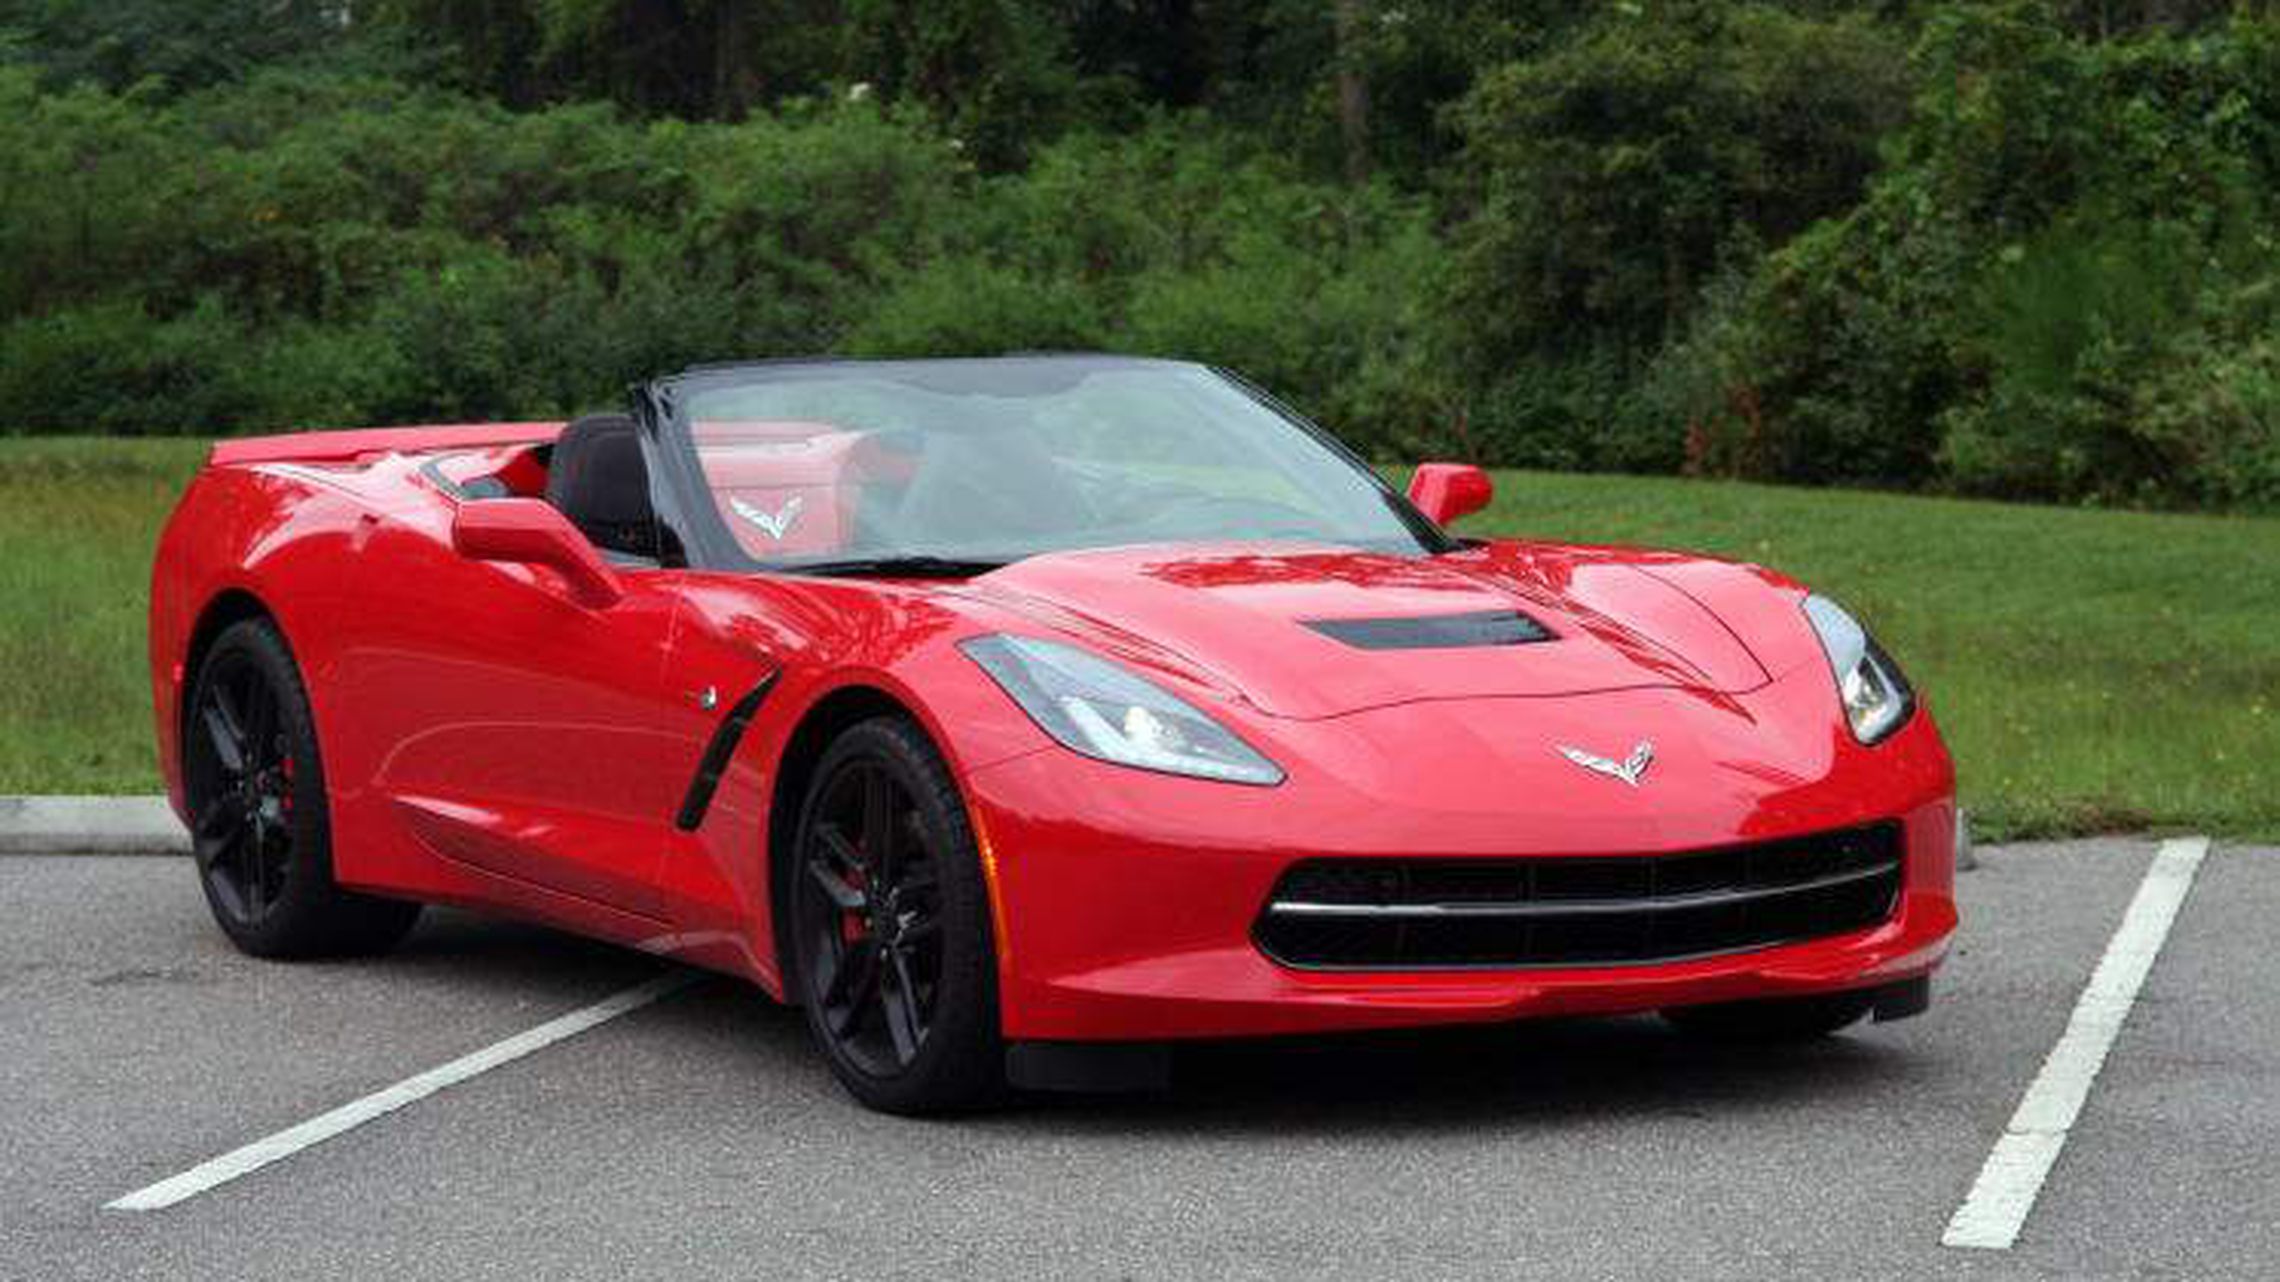 These real Torch Red paint pictures of real 2016 Chevy Corvette really show...